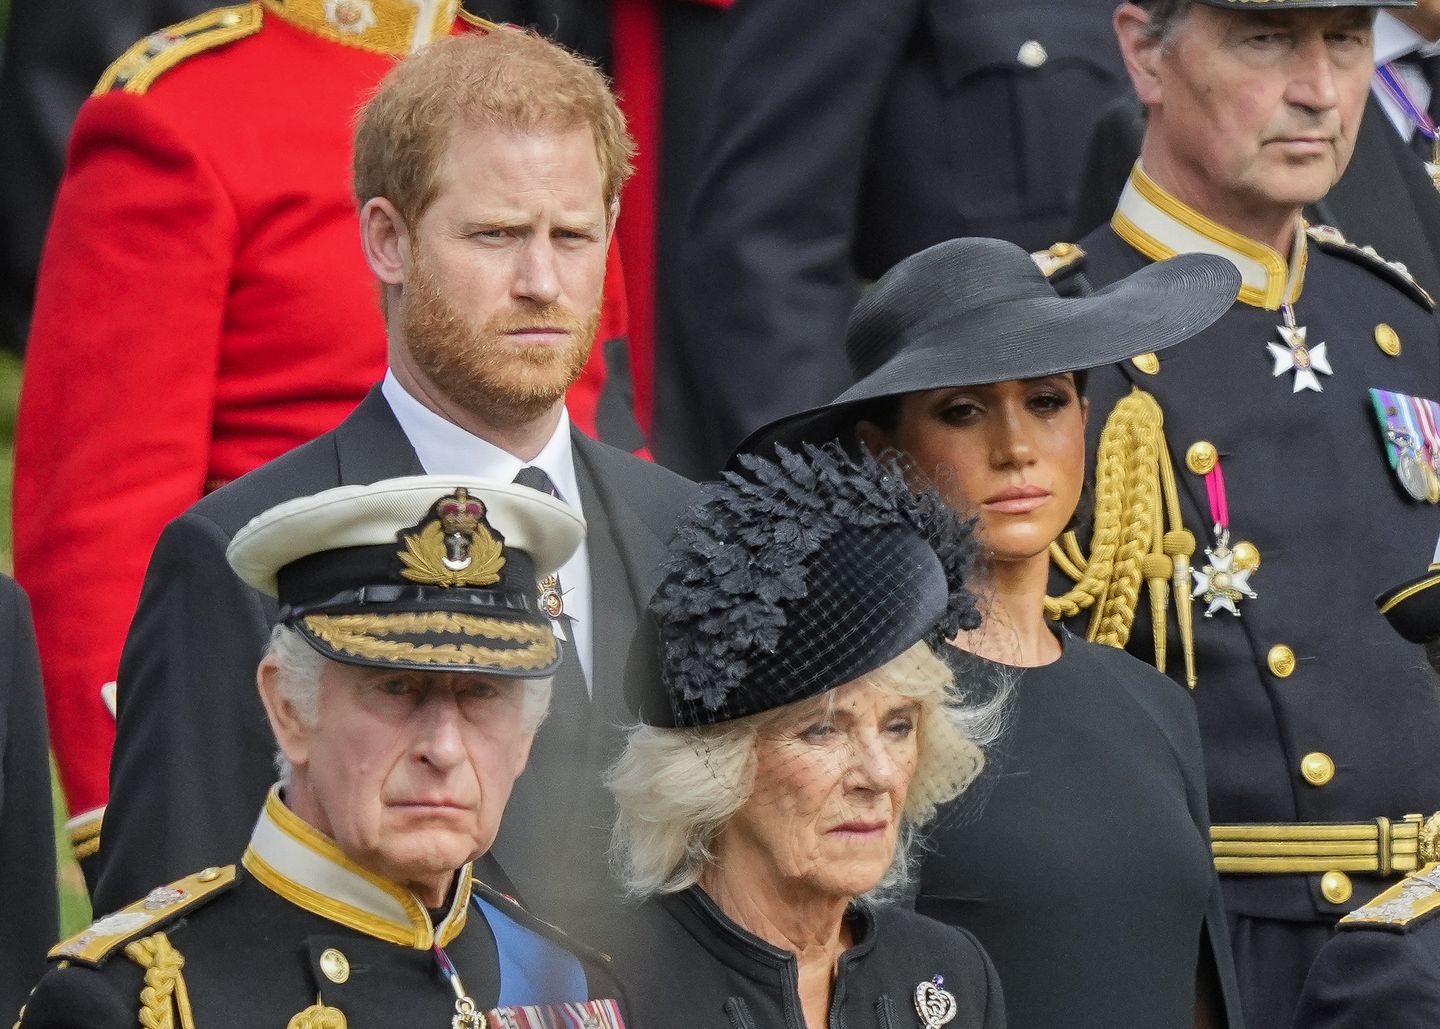 Prince Harry accuses royals of complicity in Meghan's pain